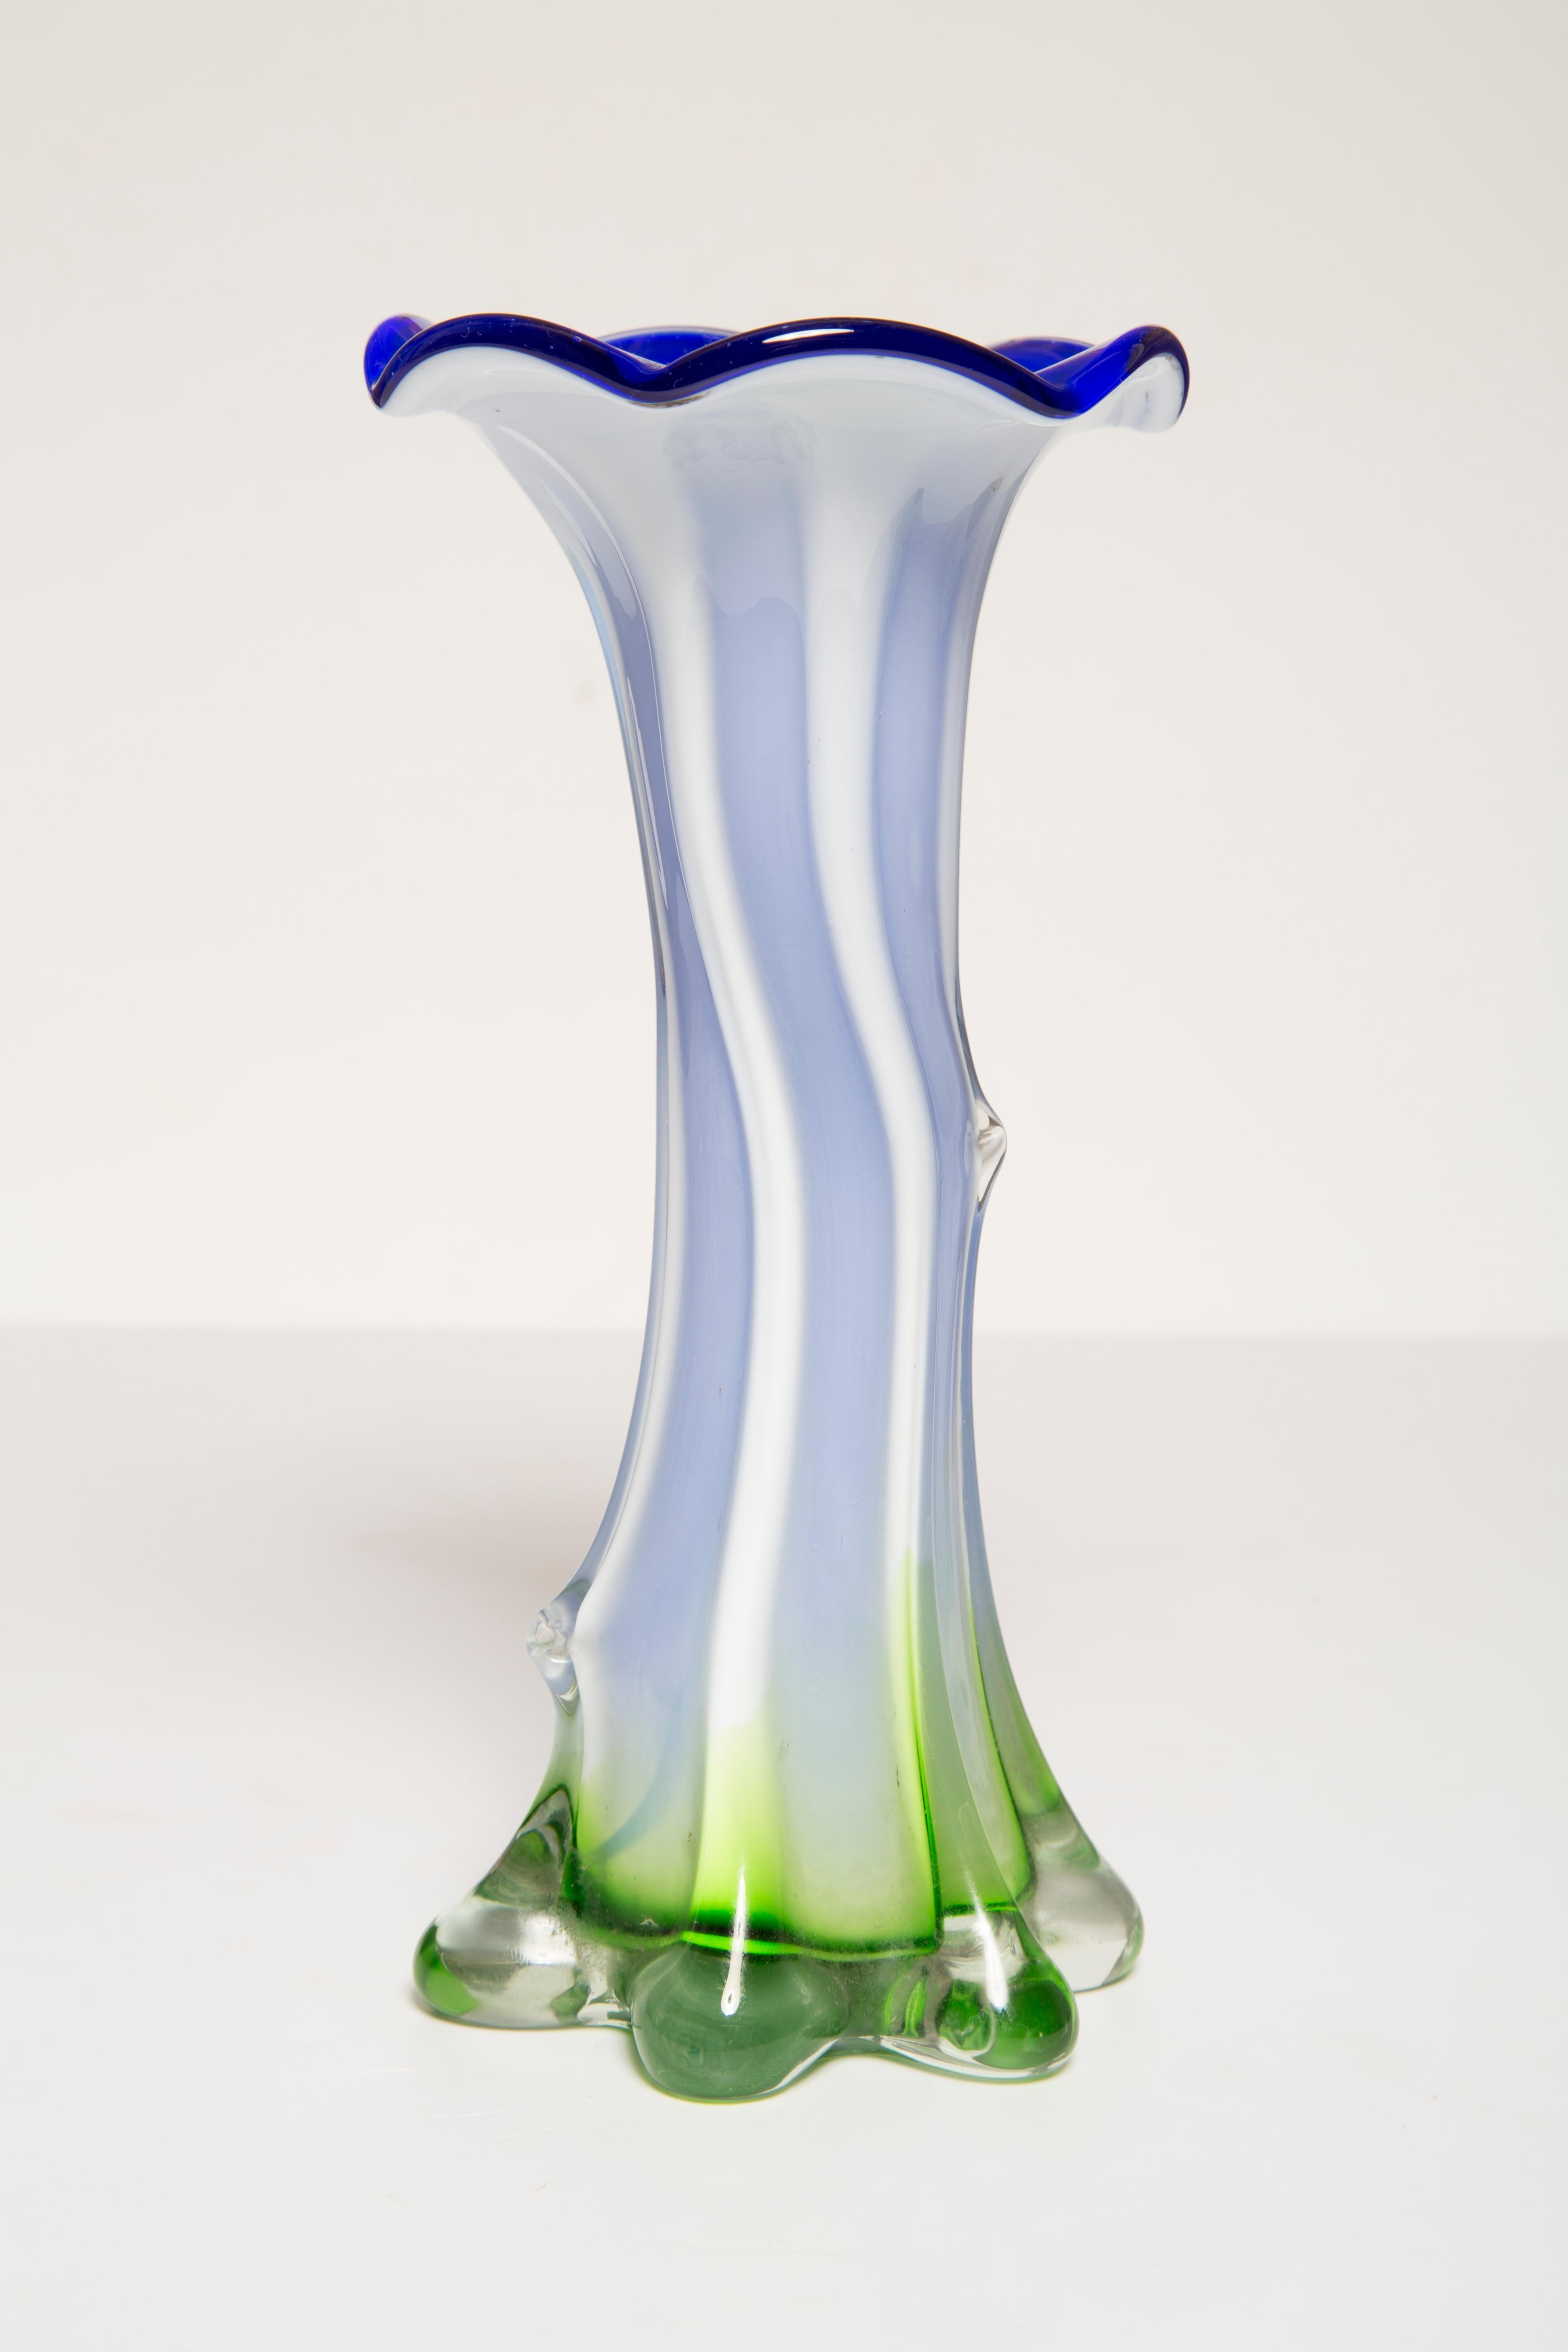 Mid Century Vintage Green and Blue Murano Vase, Italy, 1960s For Sale 3